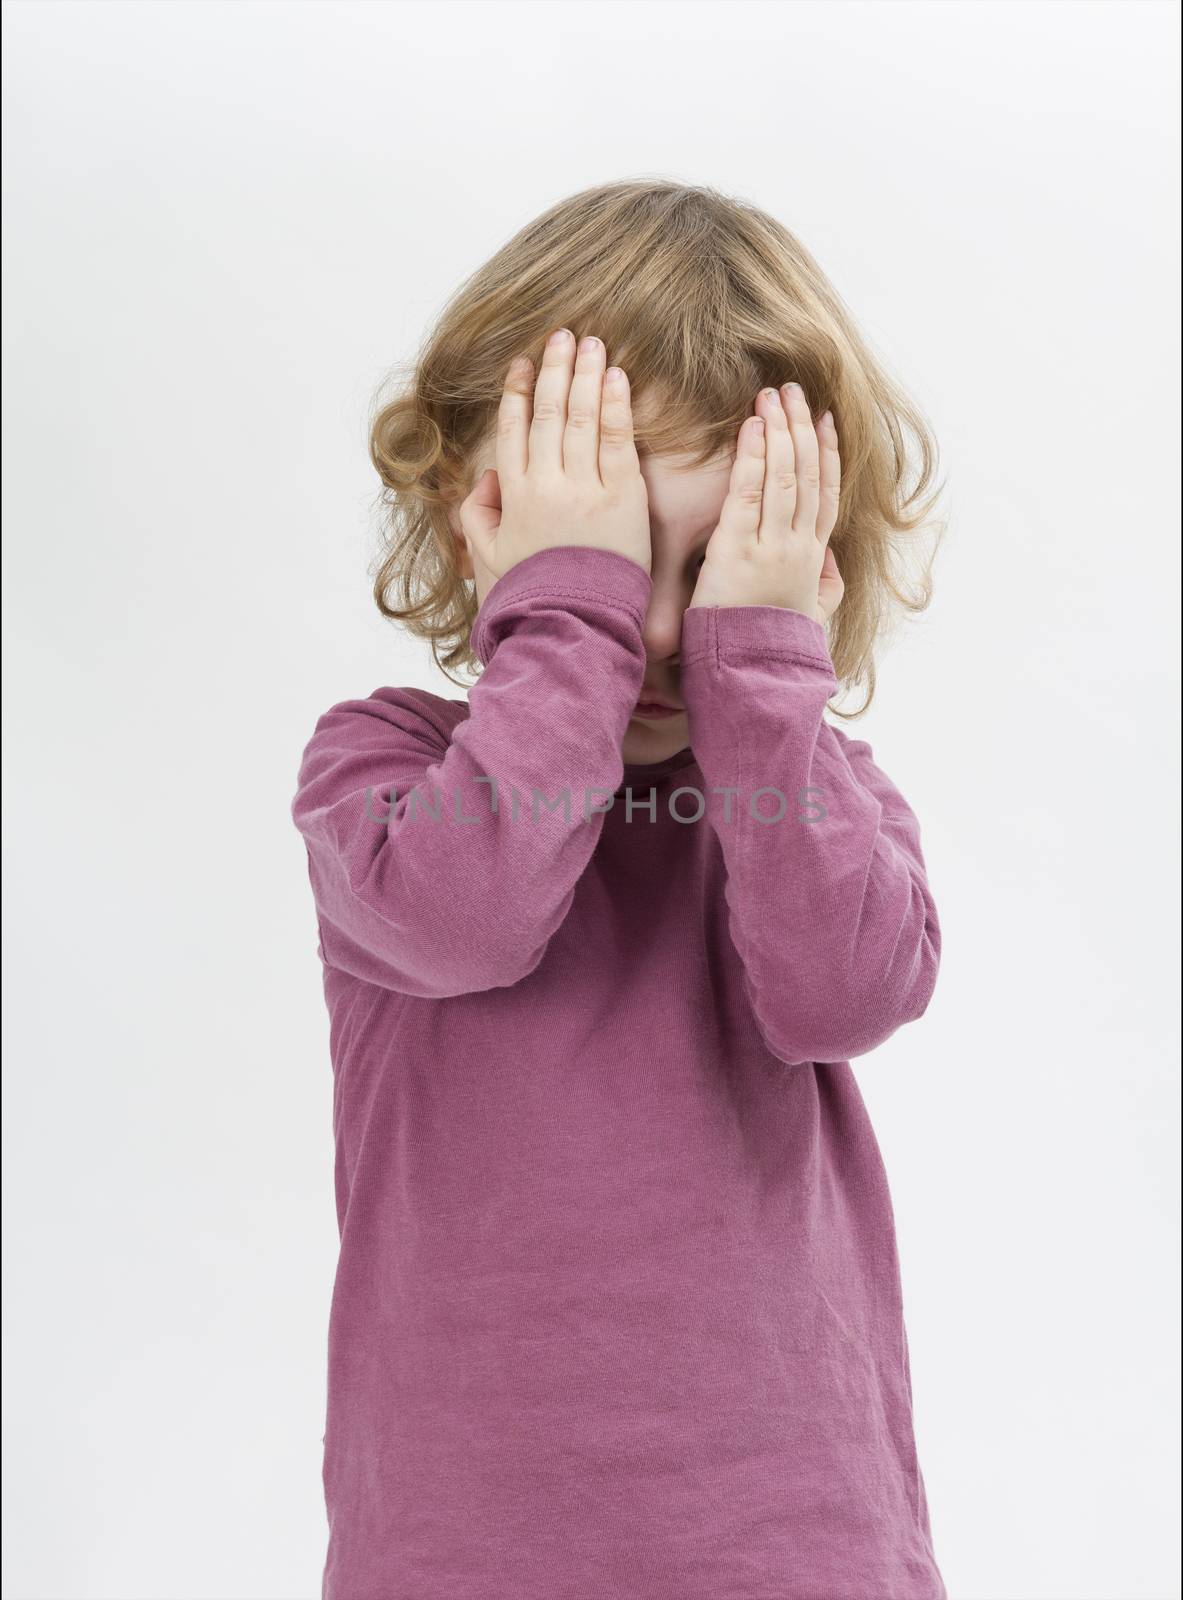 child covering eyes with hands. studio shot in grey background